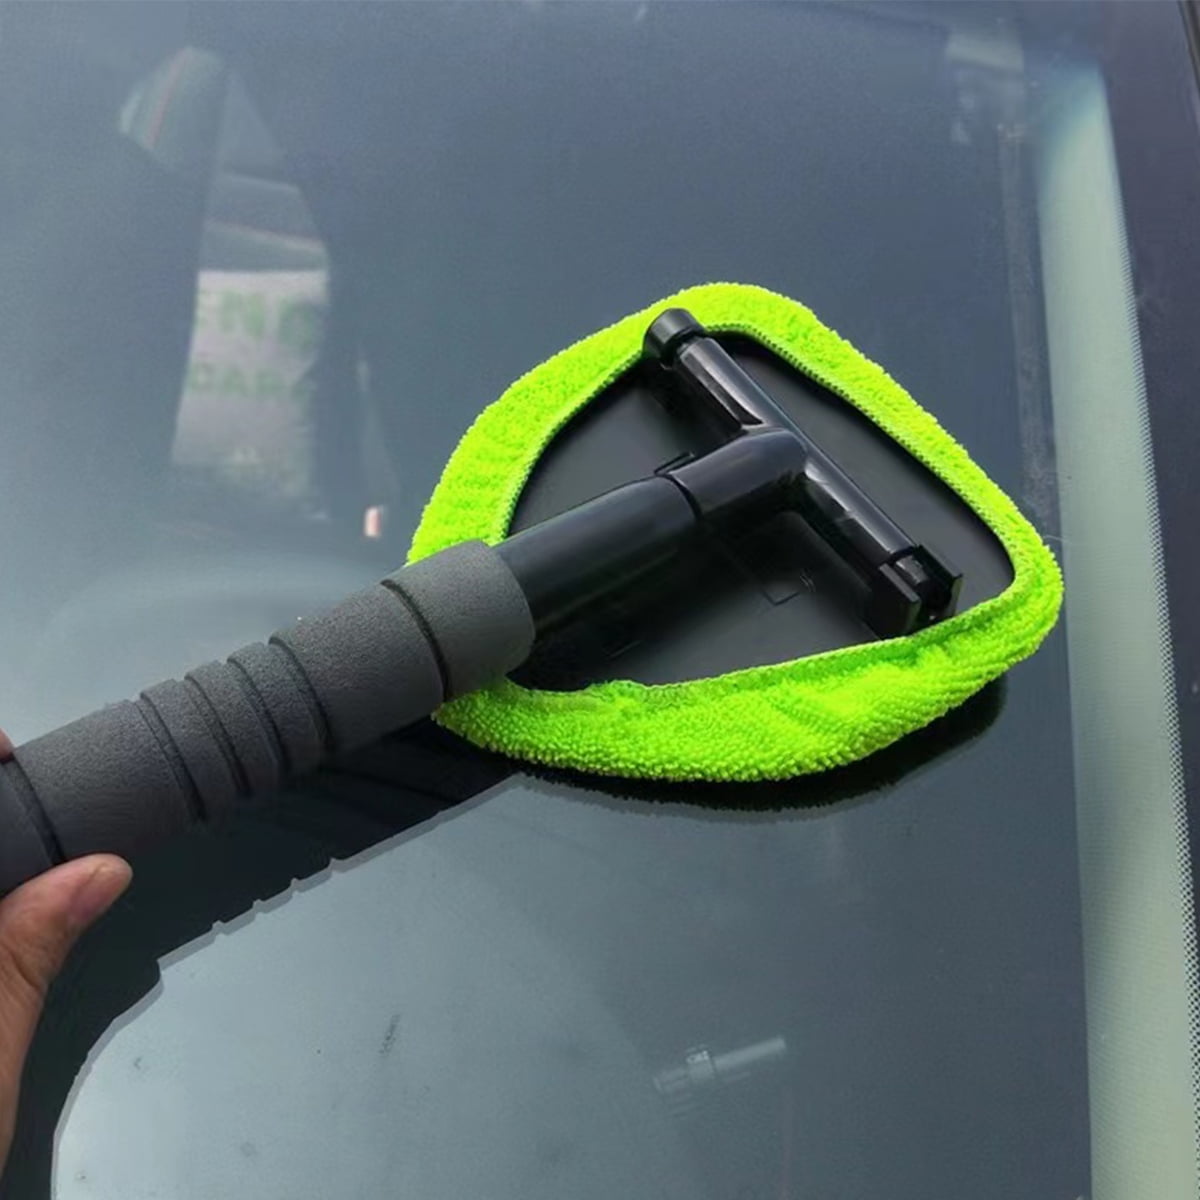 DM-095 32.5-46.5cm Windshield Cleaner with Extendable Handle and Microfiber  Cloth Cleaning Tool Car Window Cleaning Device Wholesale